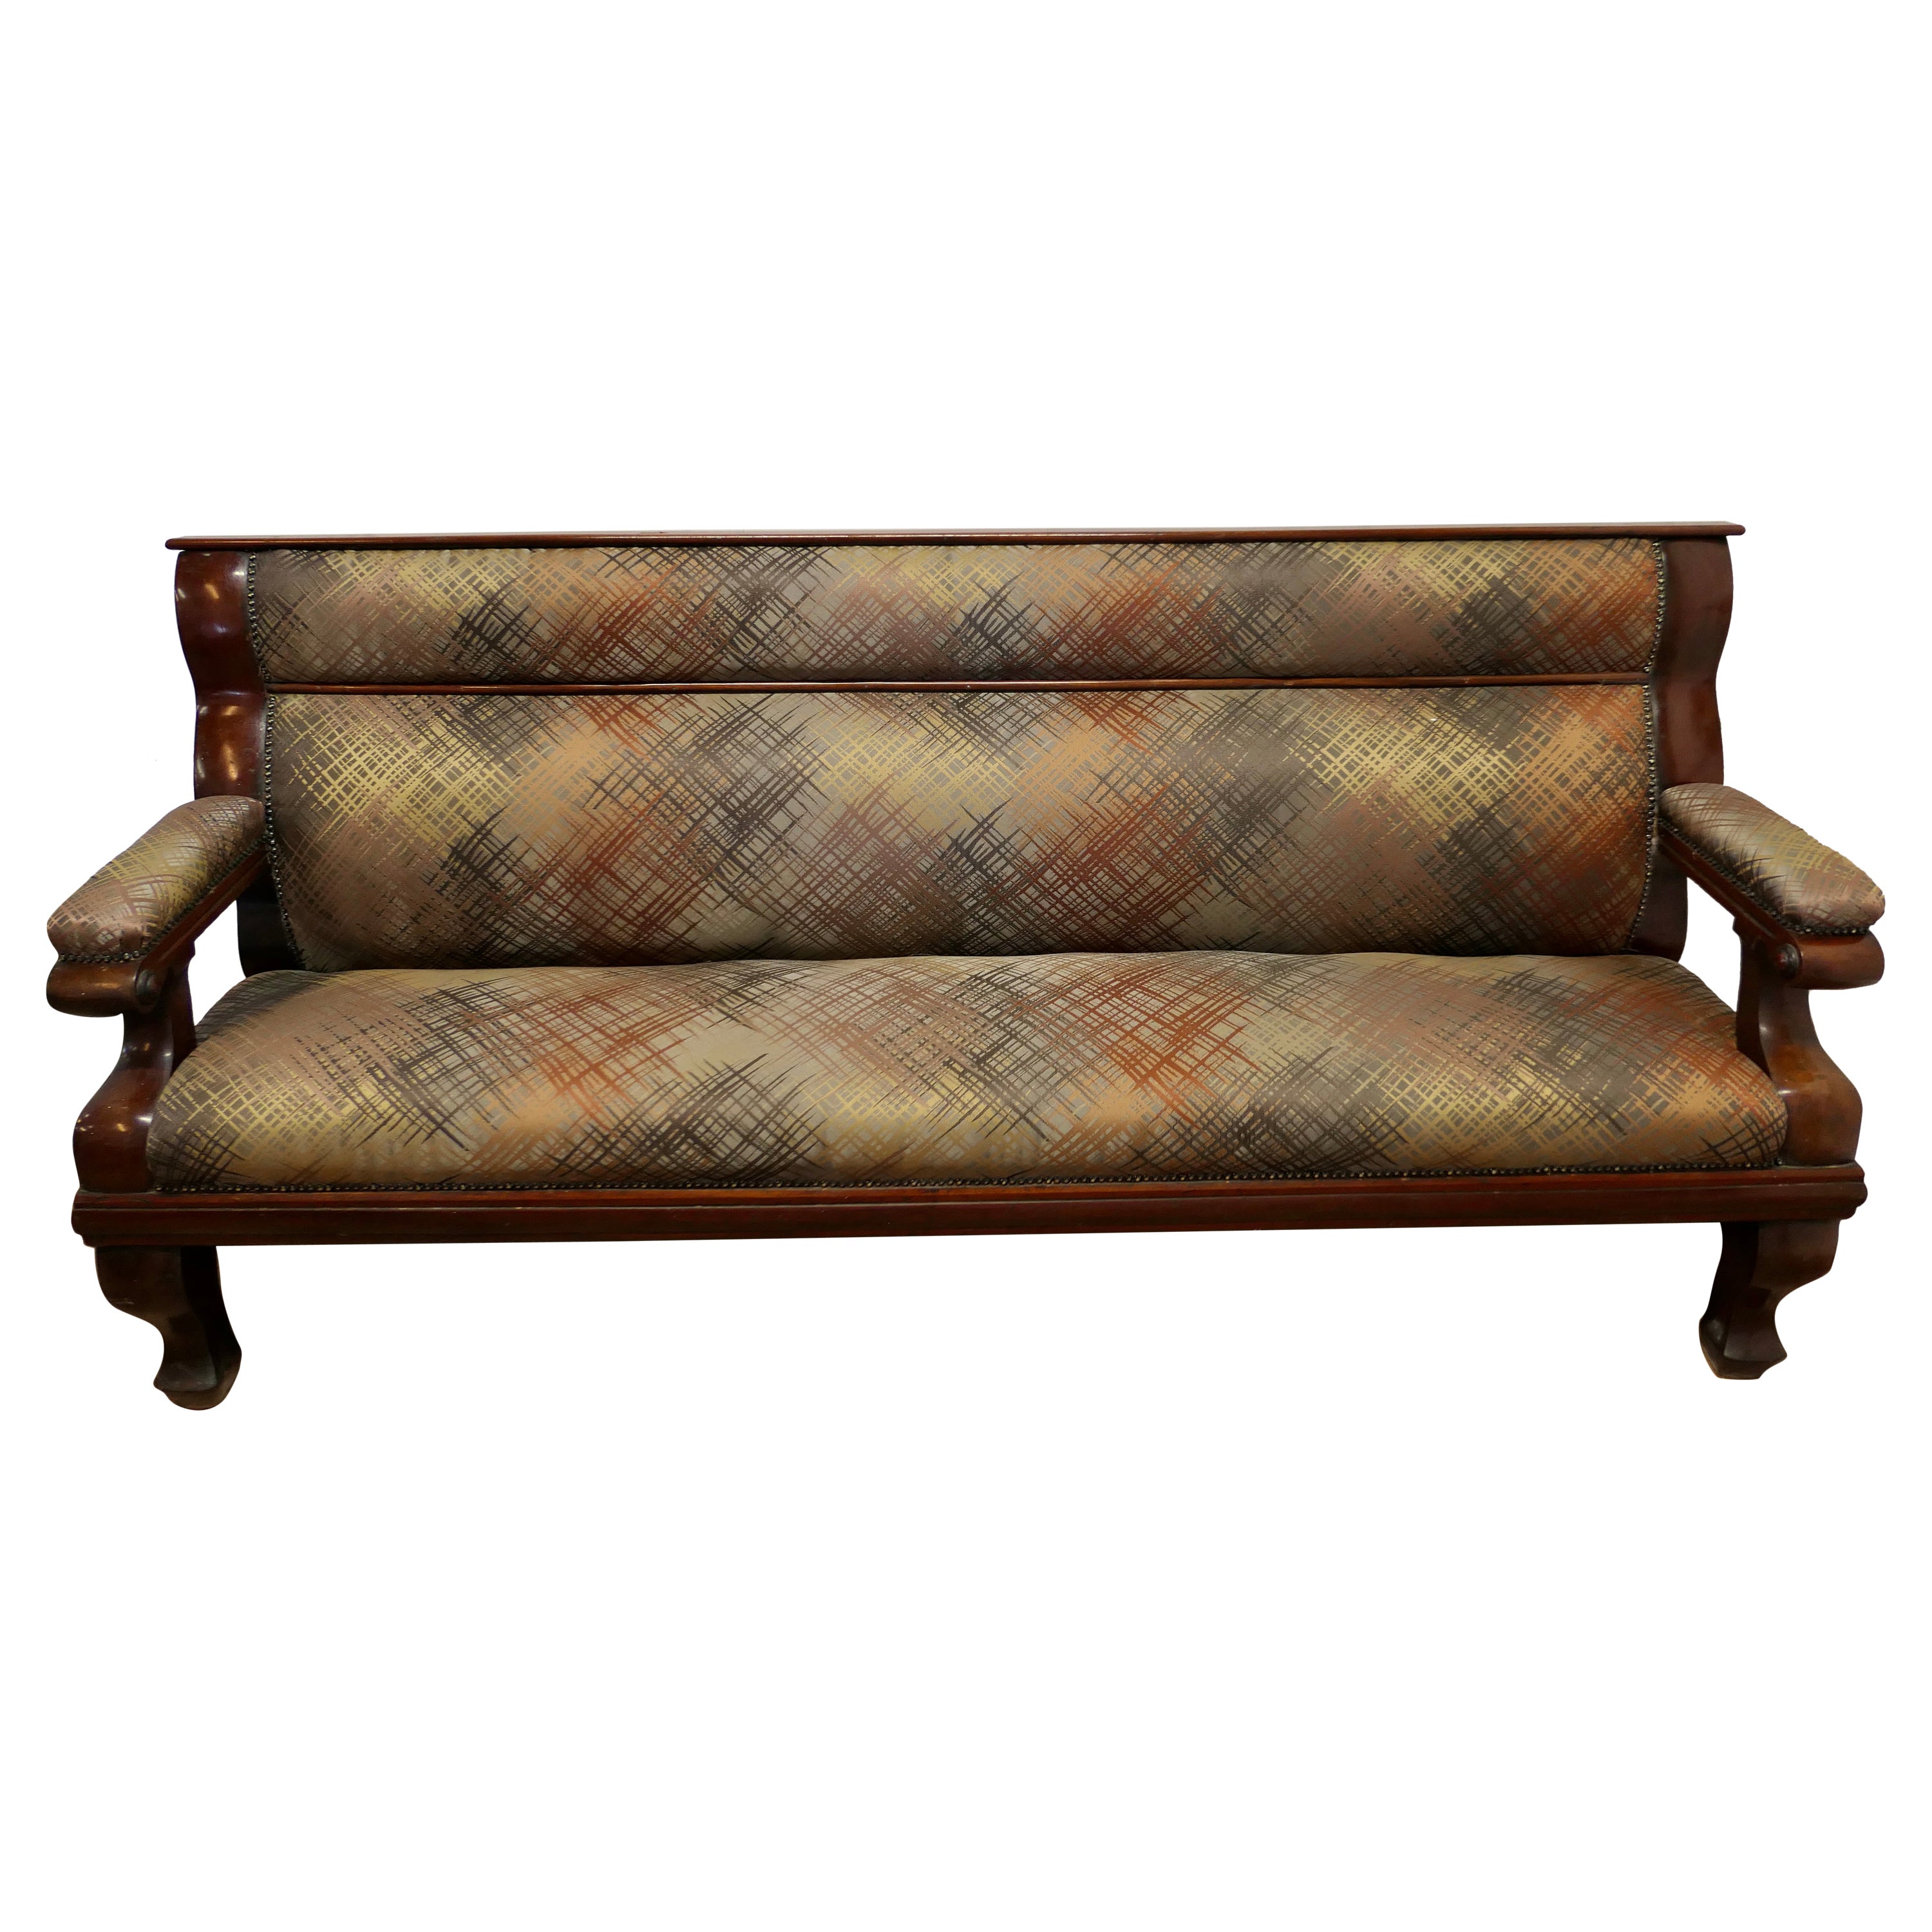 Long Waiting Room Seat or Hall Bench This Is a Very Sturdy and Heavy Piece 